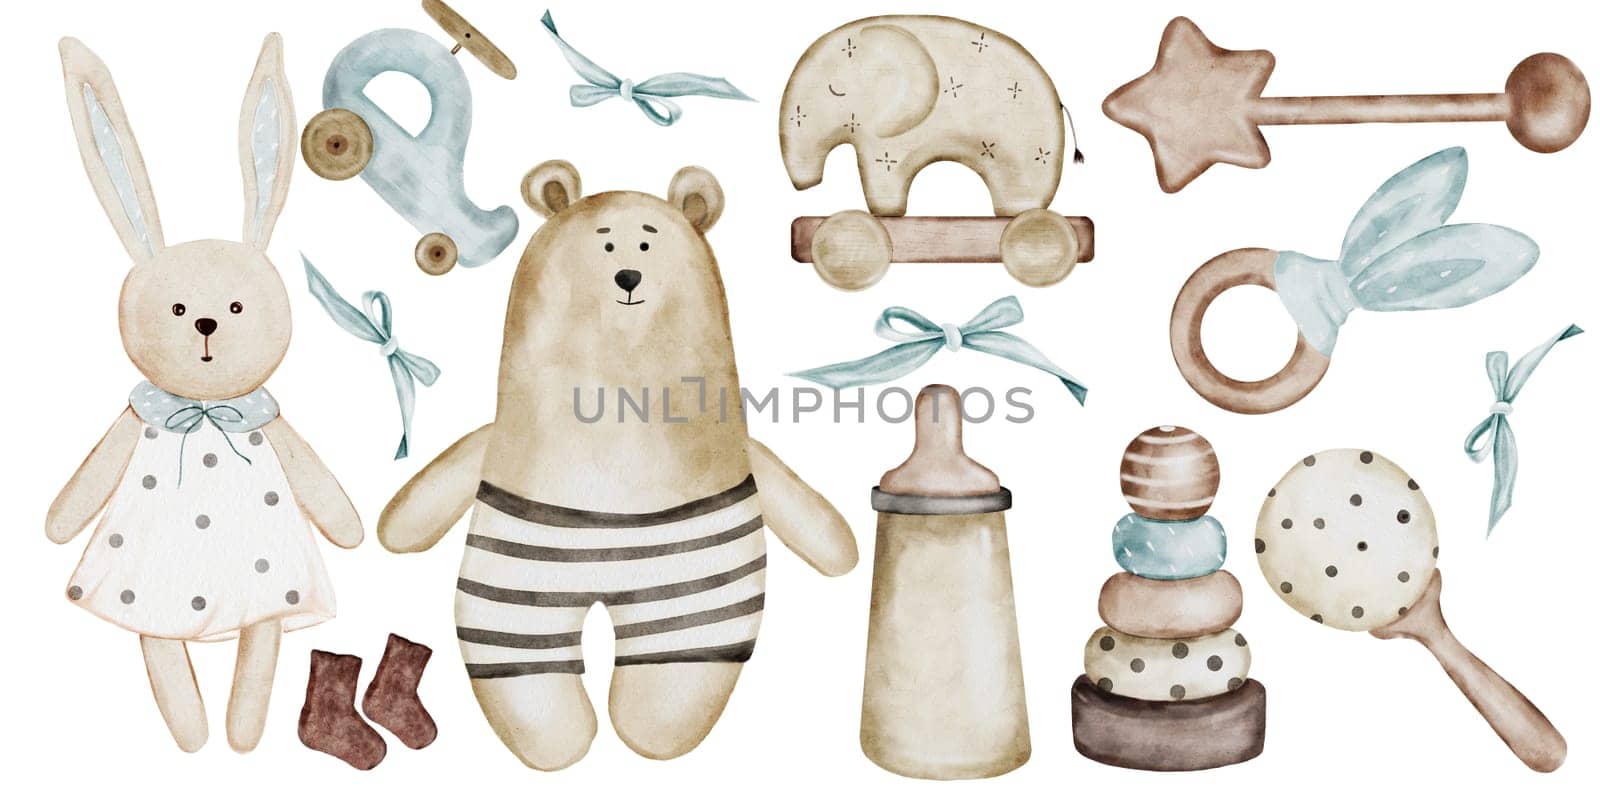 Baby toys big set. Watercolor wooden toys: bunny, bear, elephant, socks, pyramid, helicopter, rattle and bottle. Hand drawn isolated on white background. Ideal for designing baby shower and birth cards and invitations, clothing tags